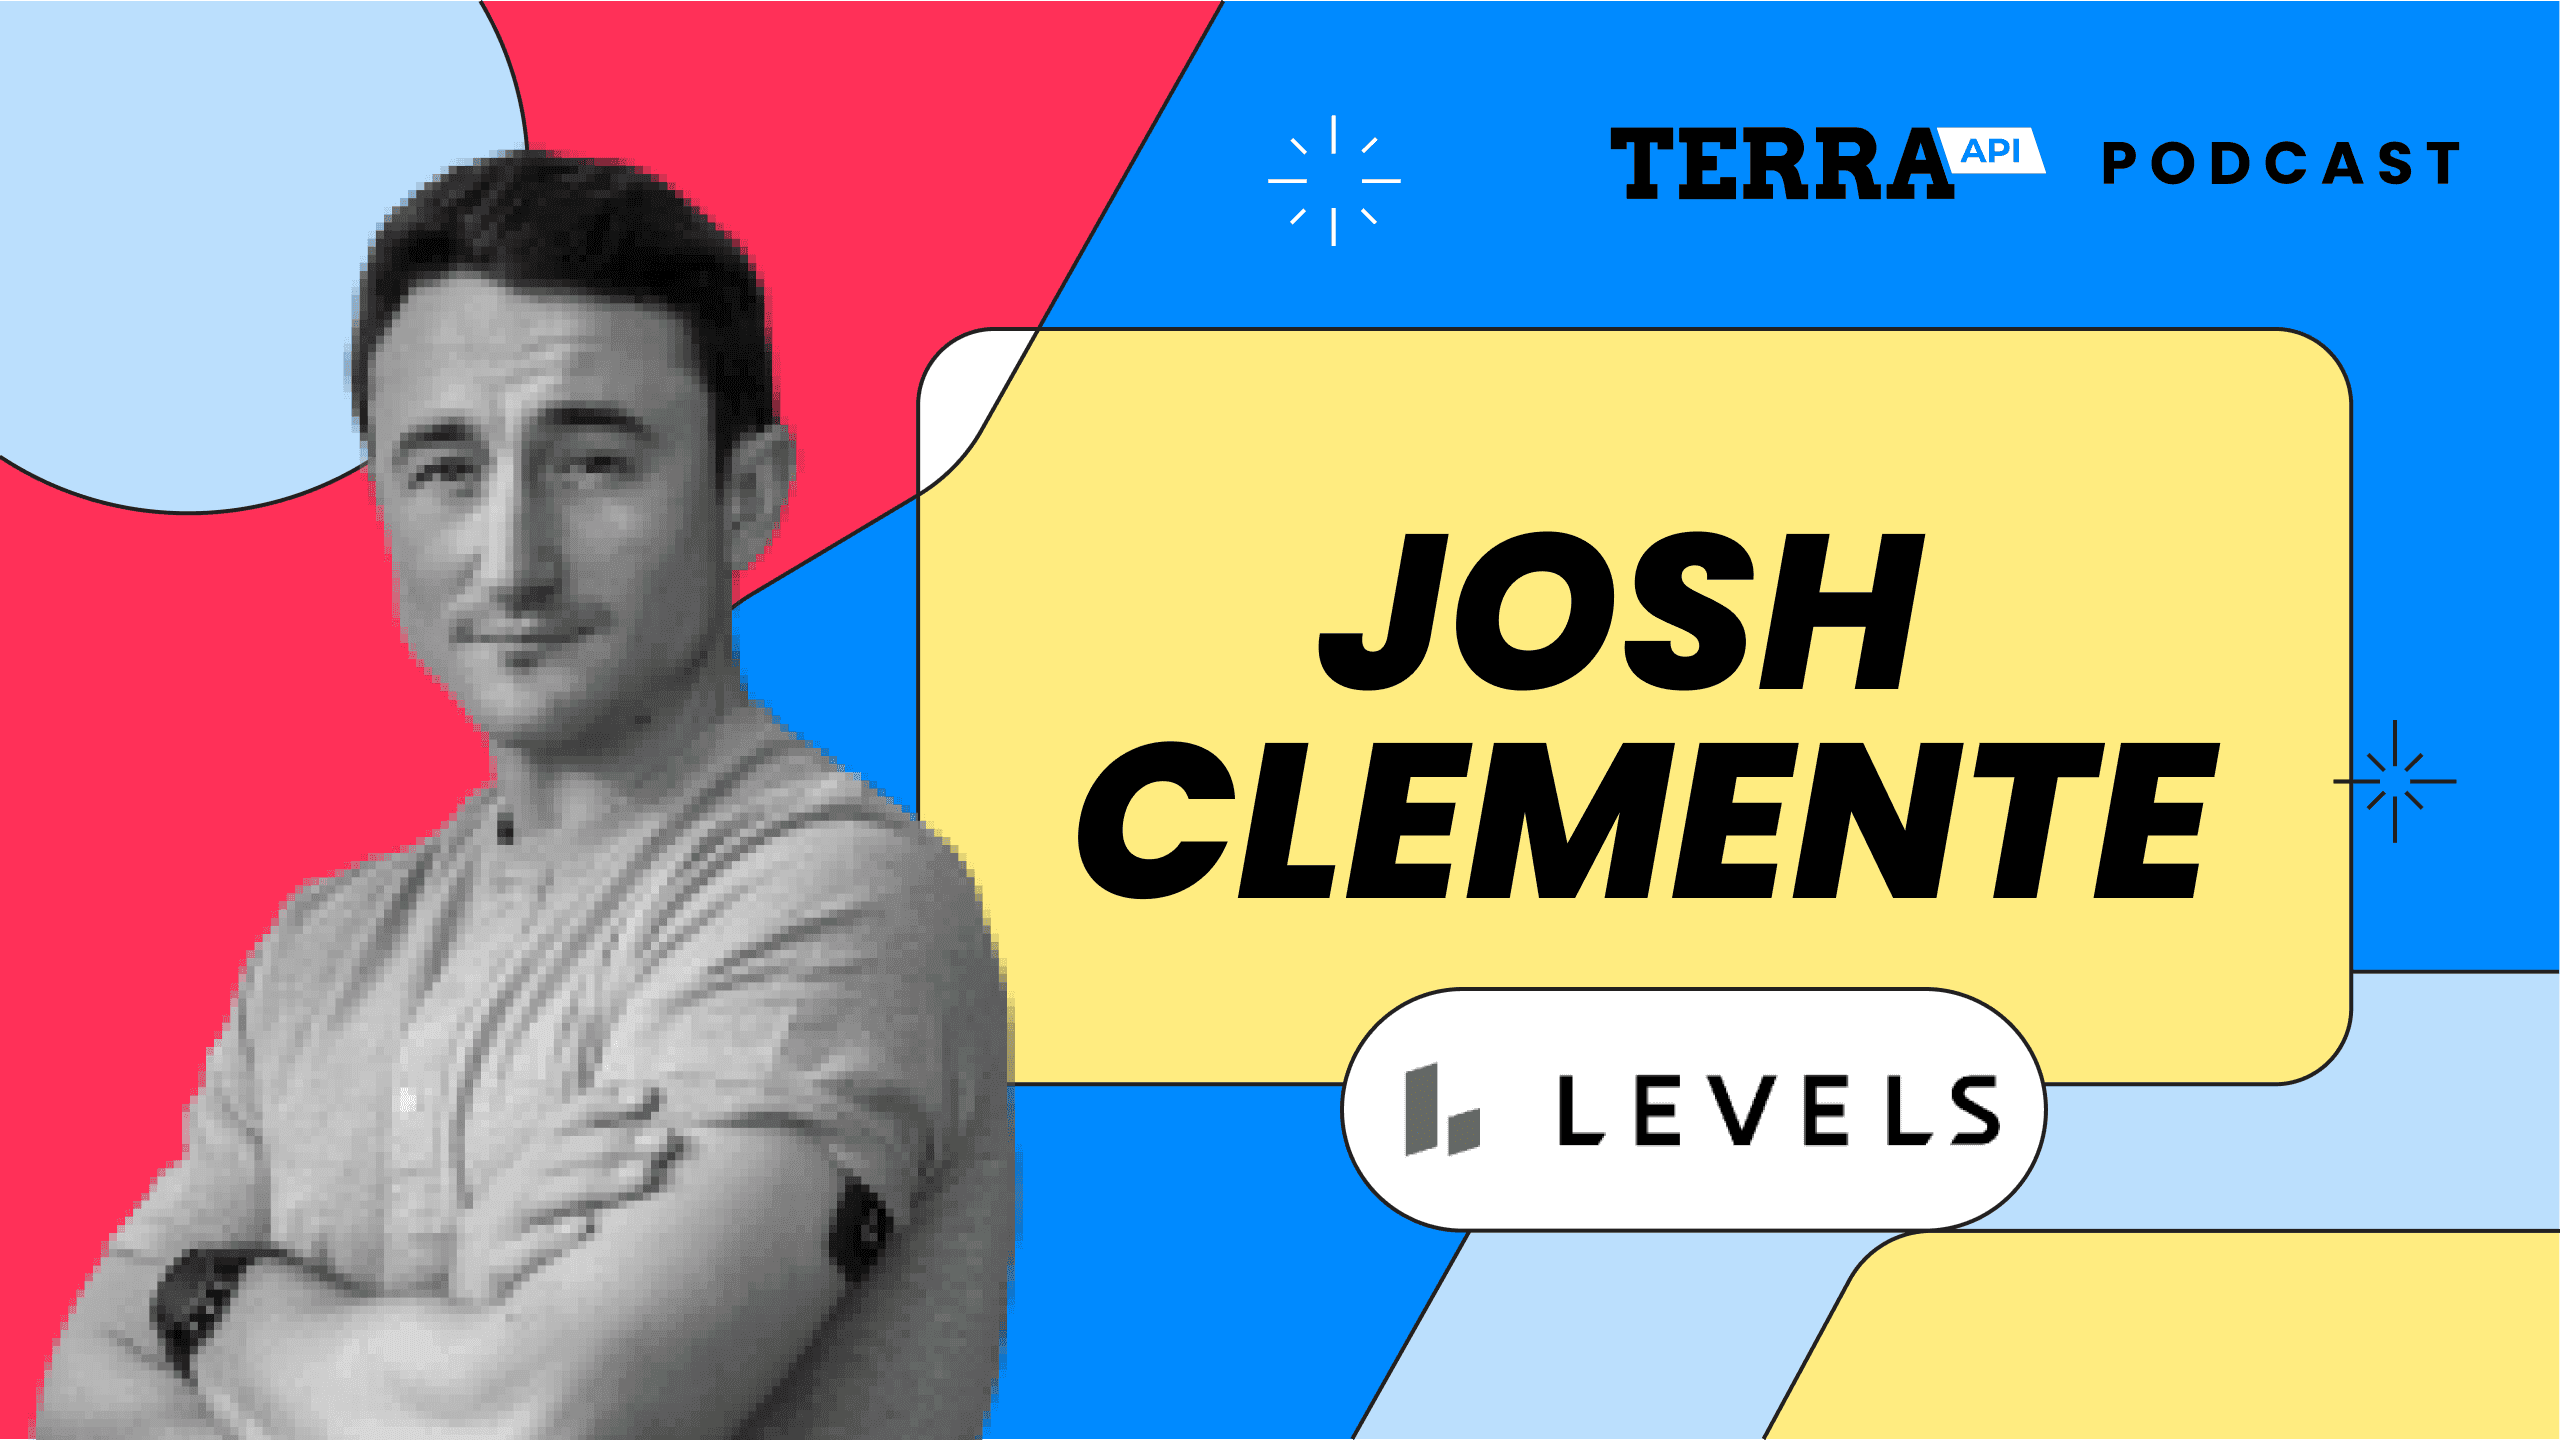 Co-founder and President of Levels: Josh Clemente